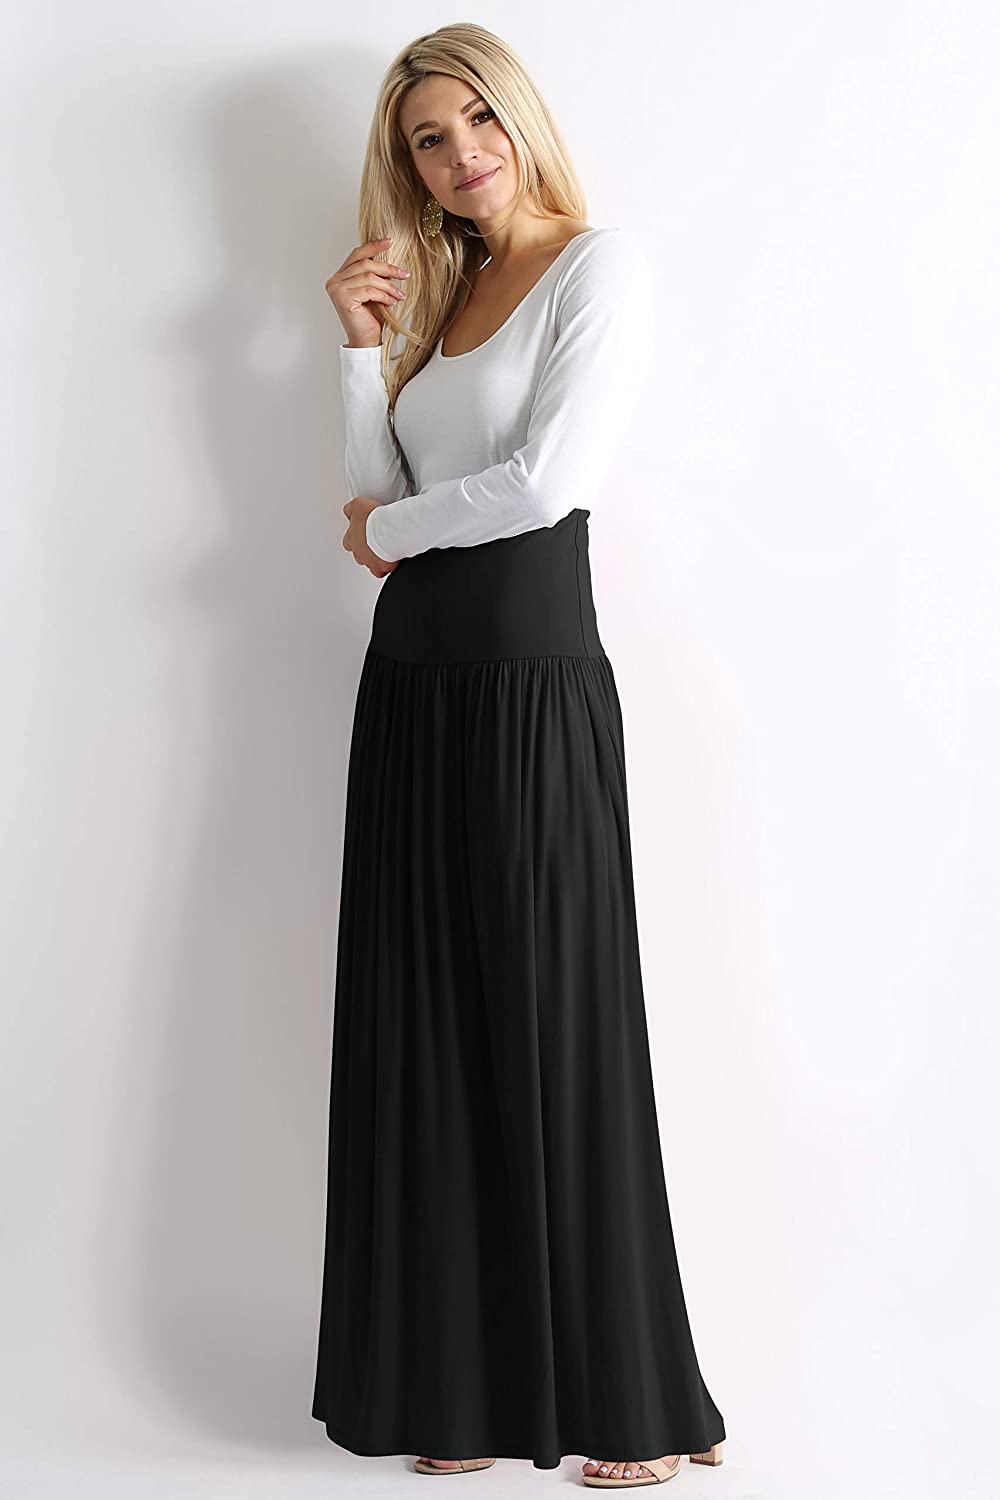 Reg and Plus Size Maxi Skirts for Women Long Length Skirts with Pockets ...